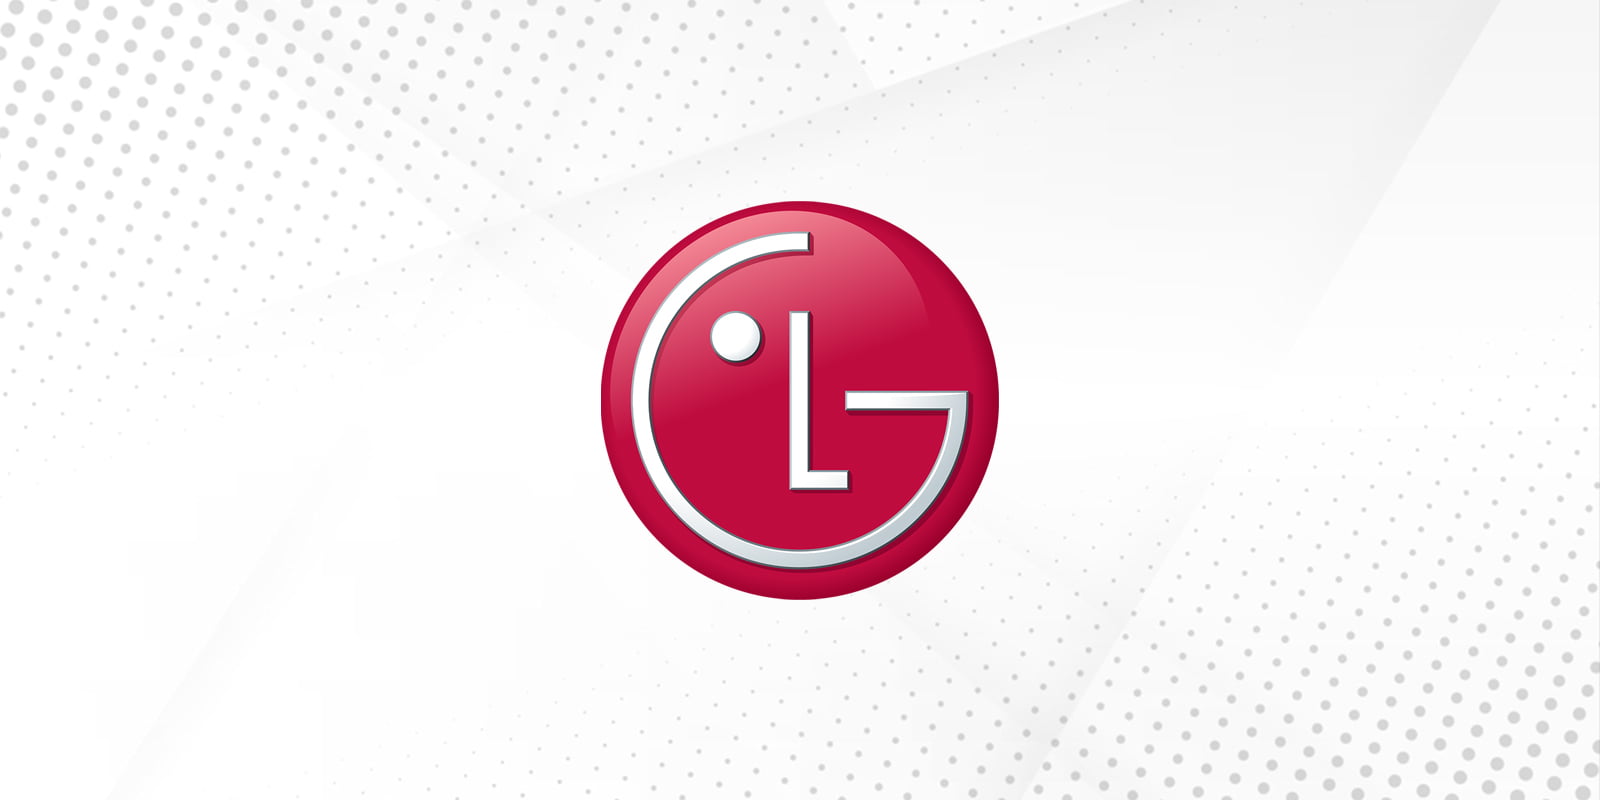 Lg May Be Shutting Down Its Smartphone Business